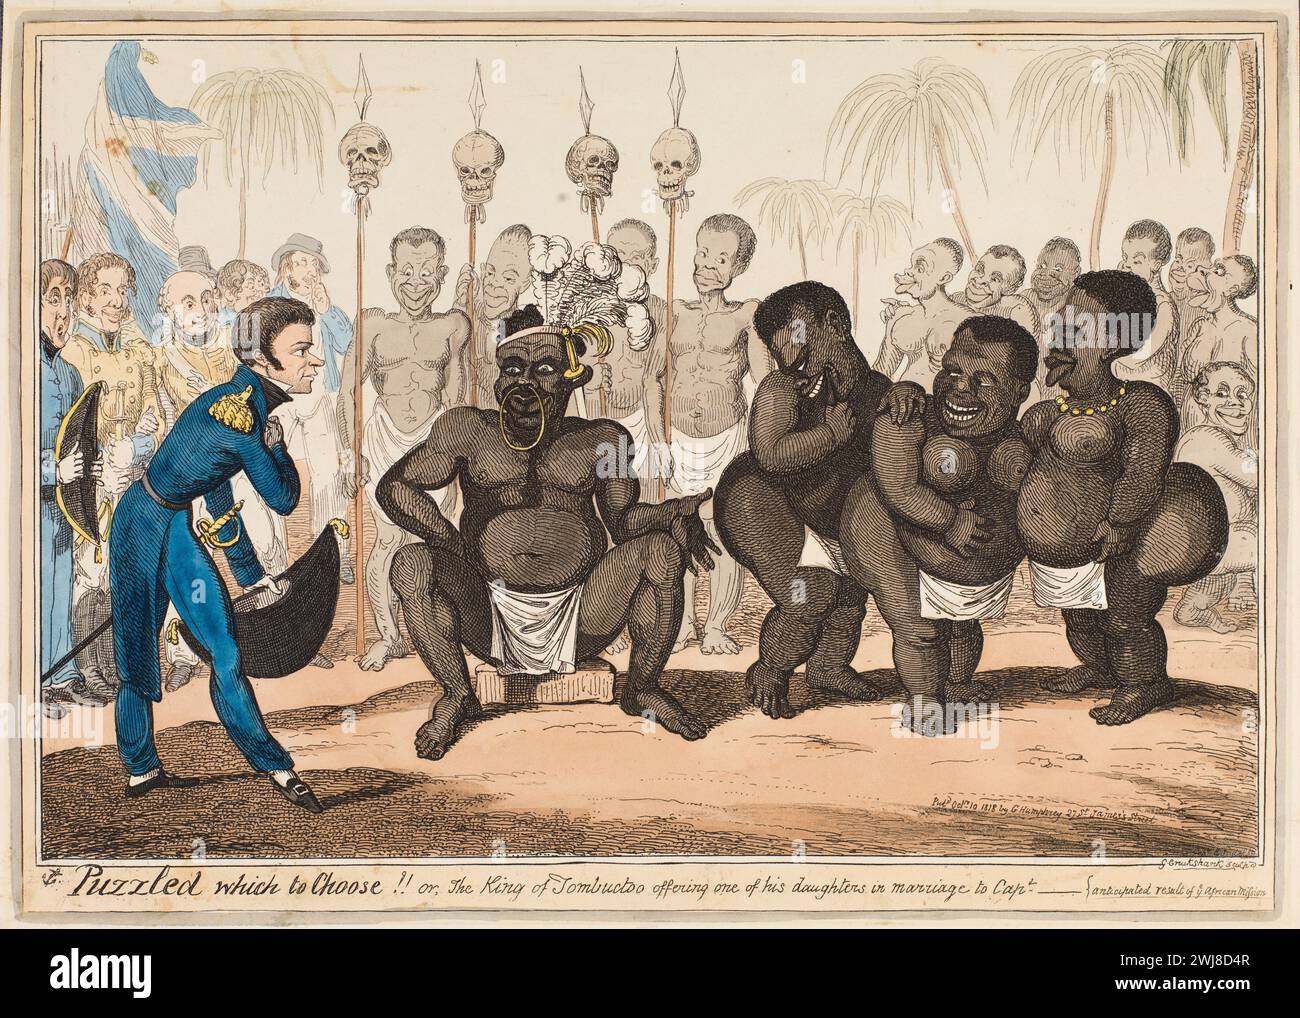 Print Titled ' Puzzled which to choose!! or, the King of Timbuctoo offering one of his daughters in marriage to Capt. -- {anticipated result of [the] African Mission}'..  An African chief displays to a naval officer (Lieutenant F.G. Lyon) three black women, who stand together, offering one to him for marriage.  Artist: Frederick Marryat, printmaker: George Cruikshank circa 1820 Stock Photo